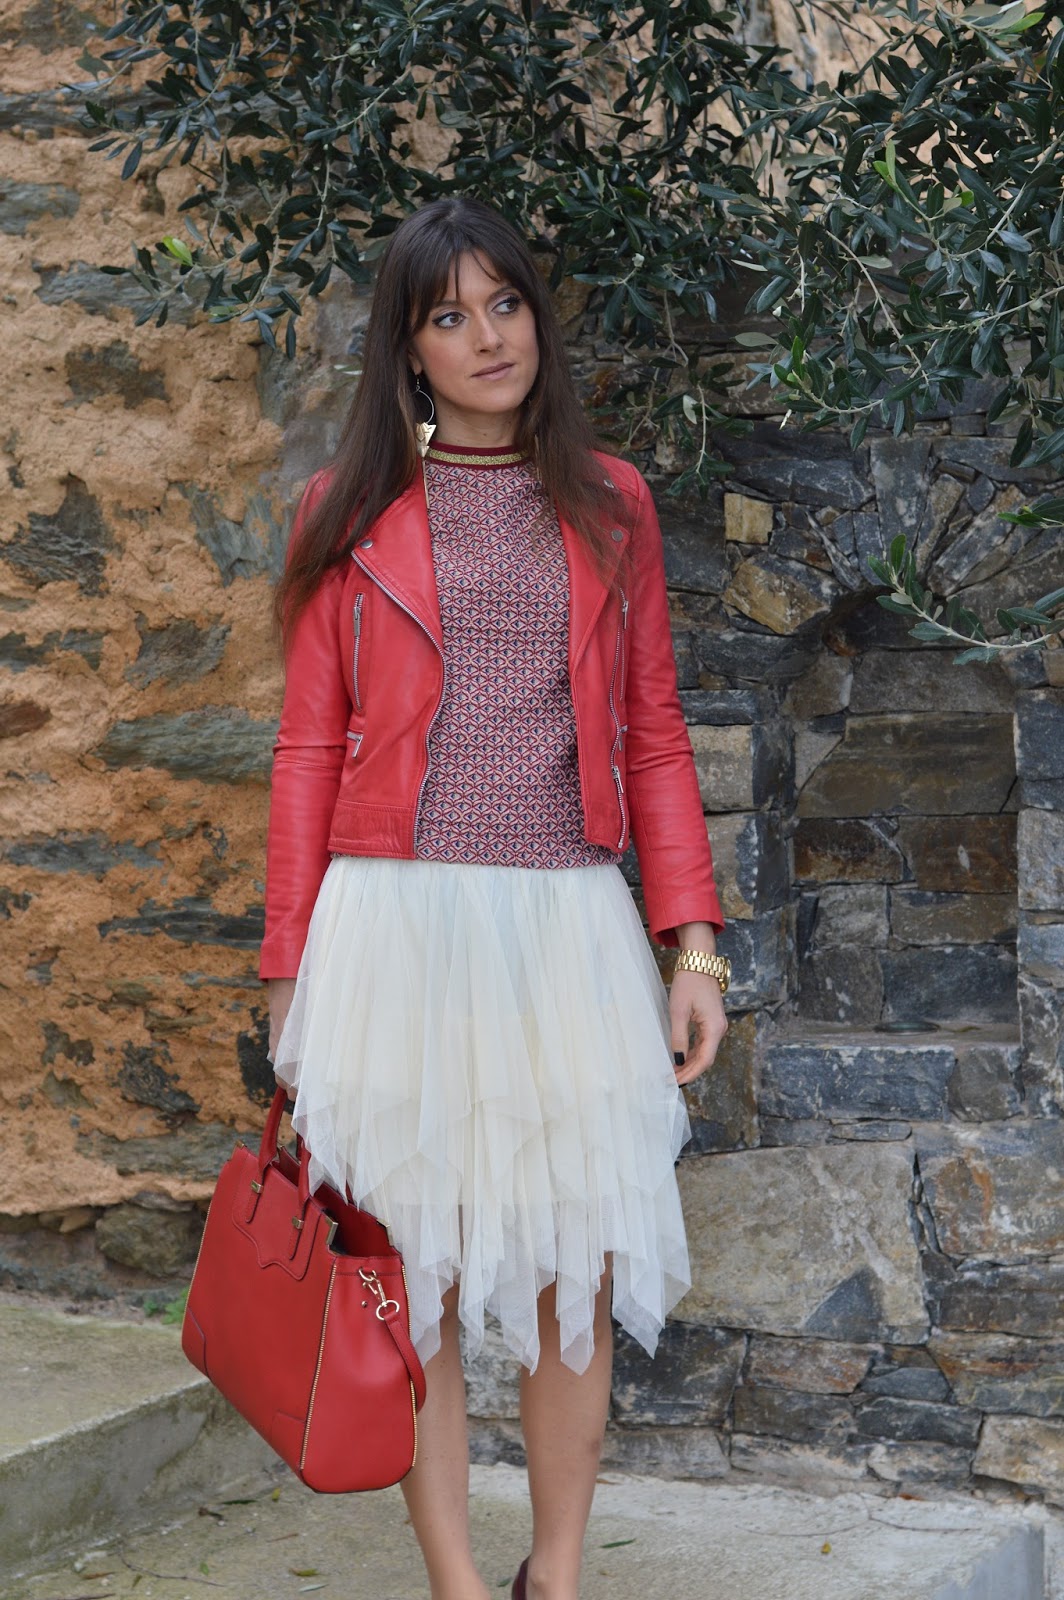 Fashion Musings Diary: Merry Christmas in Red Biker and Tutu Skirt! ♥ ...